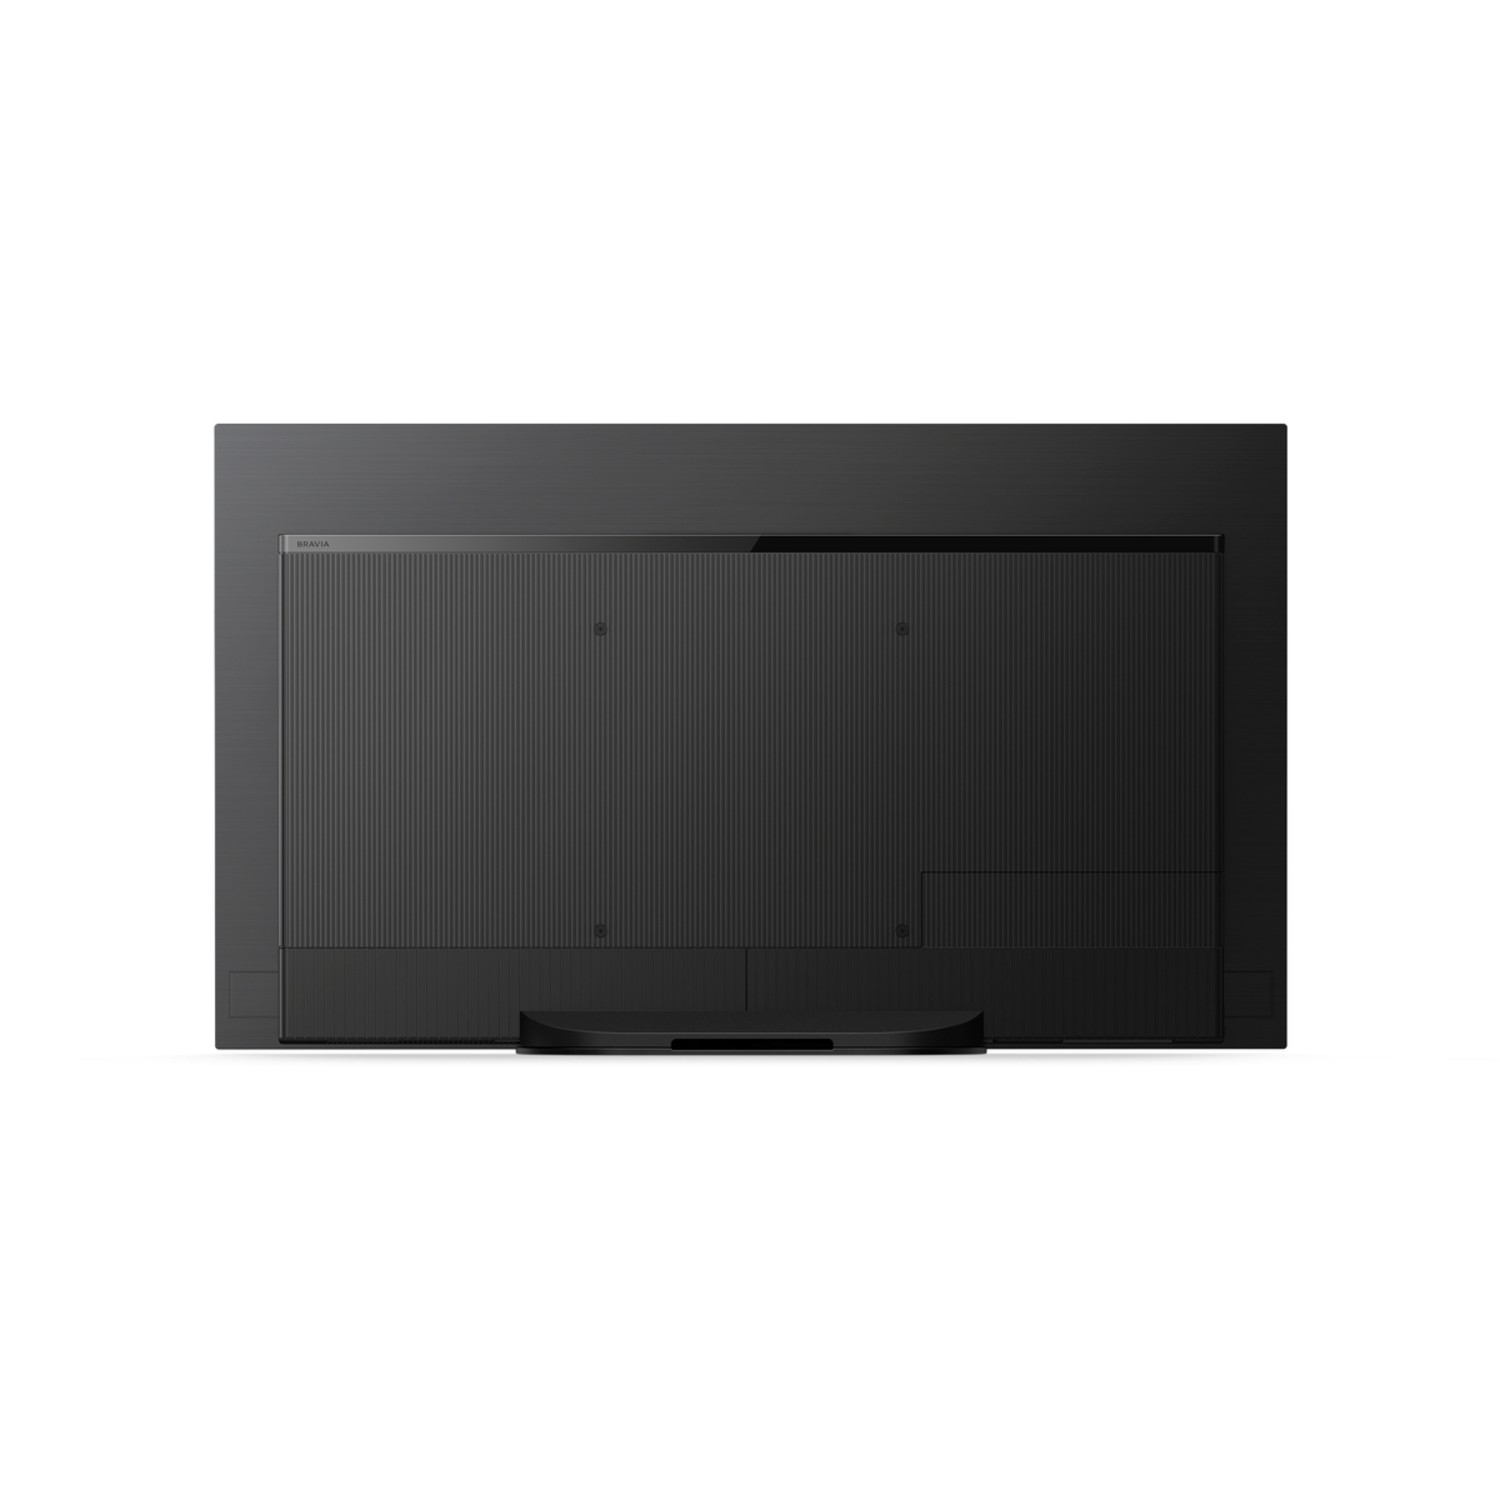 Sony KE48A9BU 48" OLED 4K Ultra HD HDR Smart Android TV with Google Assistant Black - 10